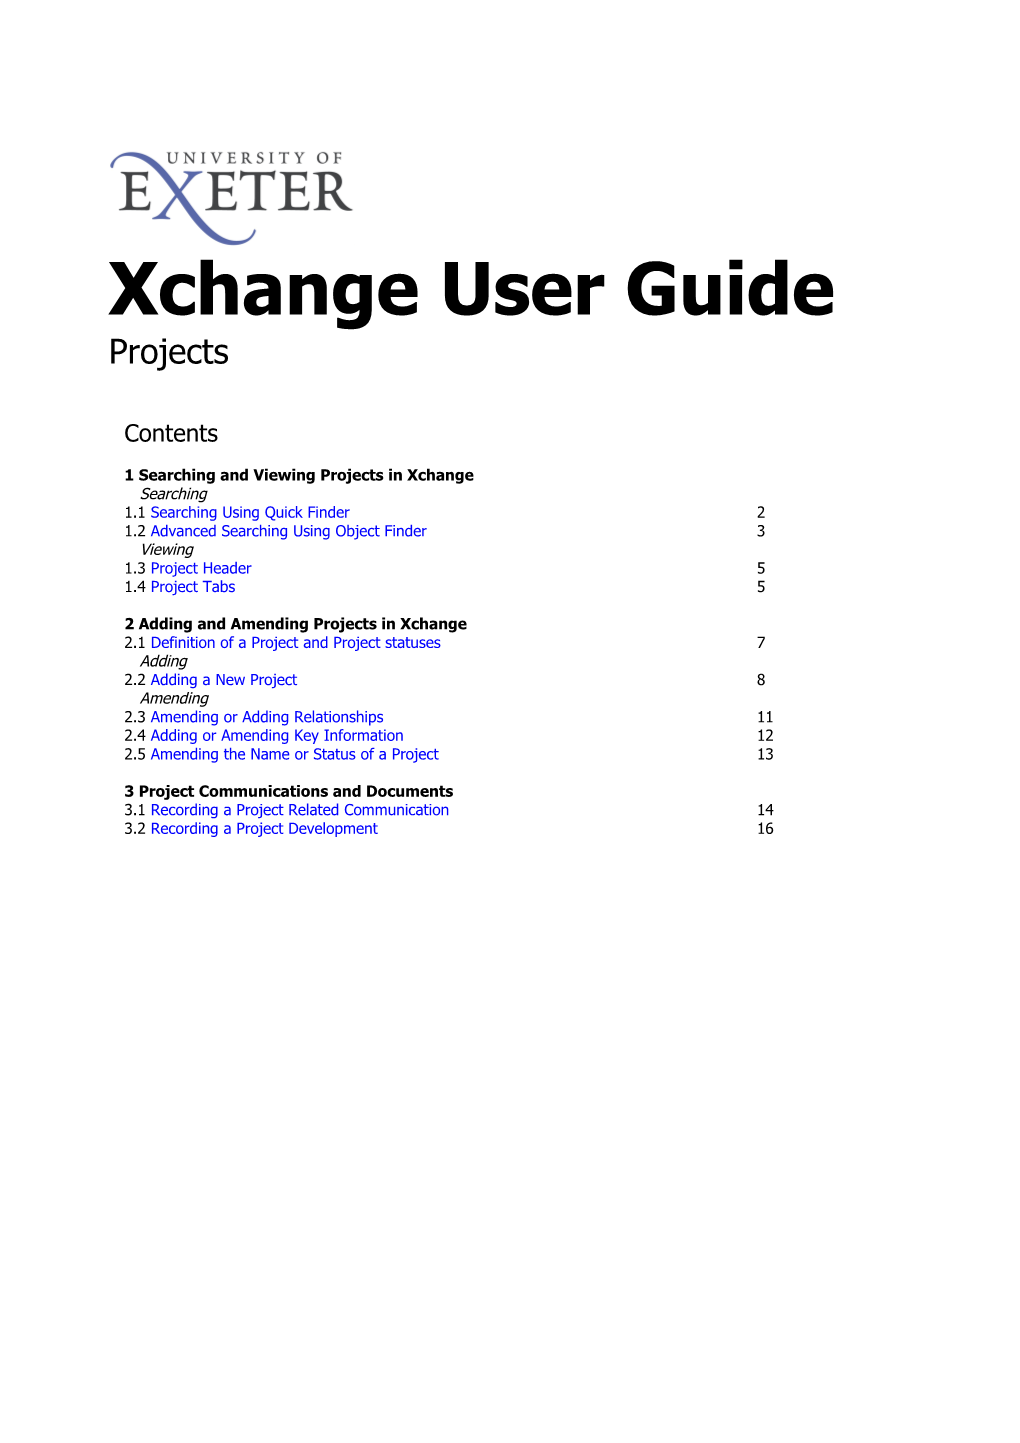 1Searching and Viewing Projects in Xchange